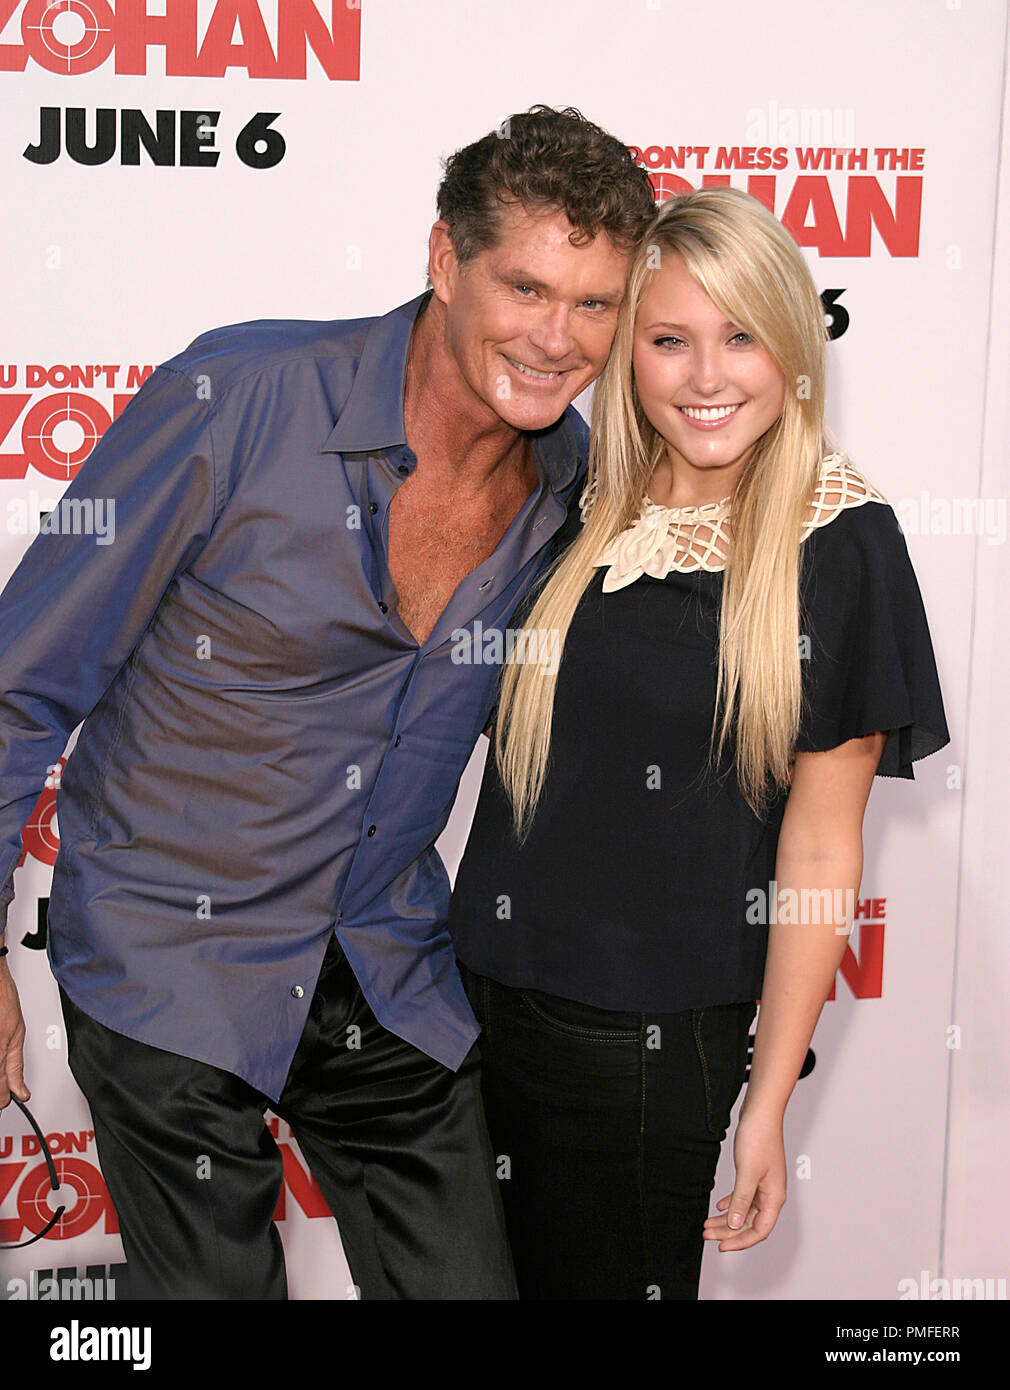 'You Don't Mess with the Zohan' Premiere  David Hasselhoff, Hayley Hasselhoff 5-28-2008 / Grauman's Chinese Theater / Hollywood, CA / Columbia Pictures / Photo © Joseph Martinez / Picturelux  File Reference # 23525 0021JM   For Editorial Use Only -  All Rights Reserved Stock Photo